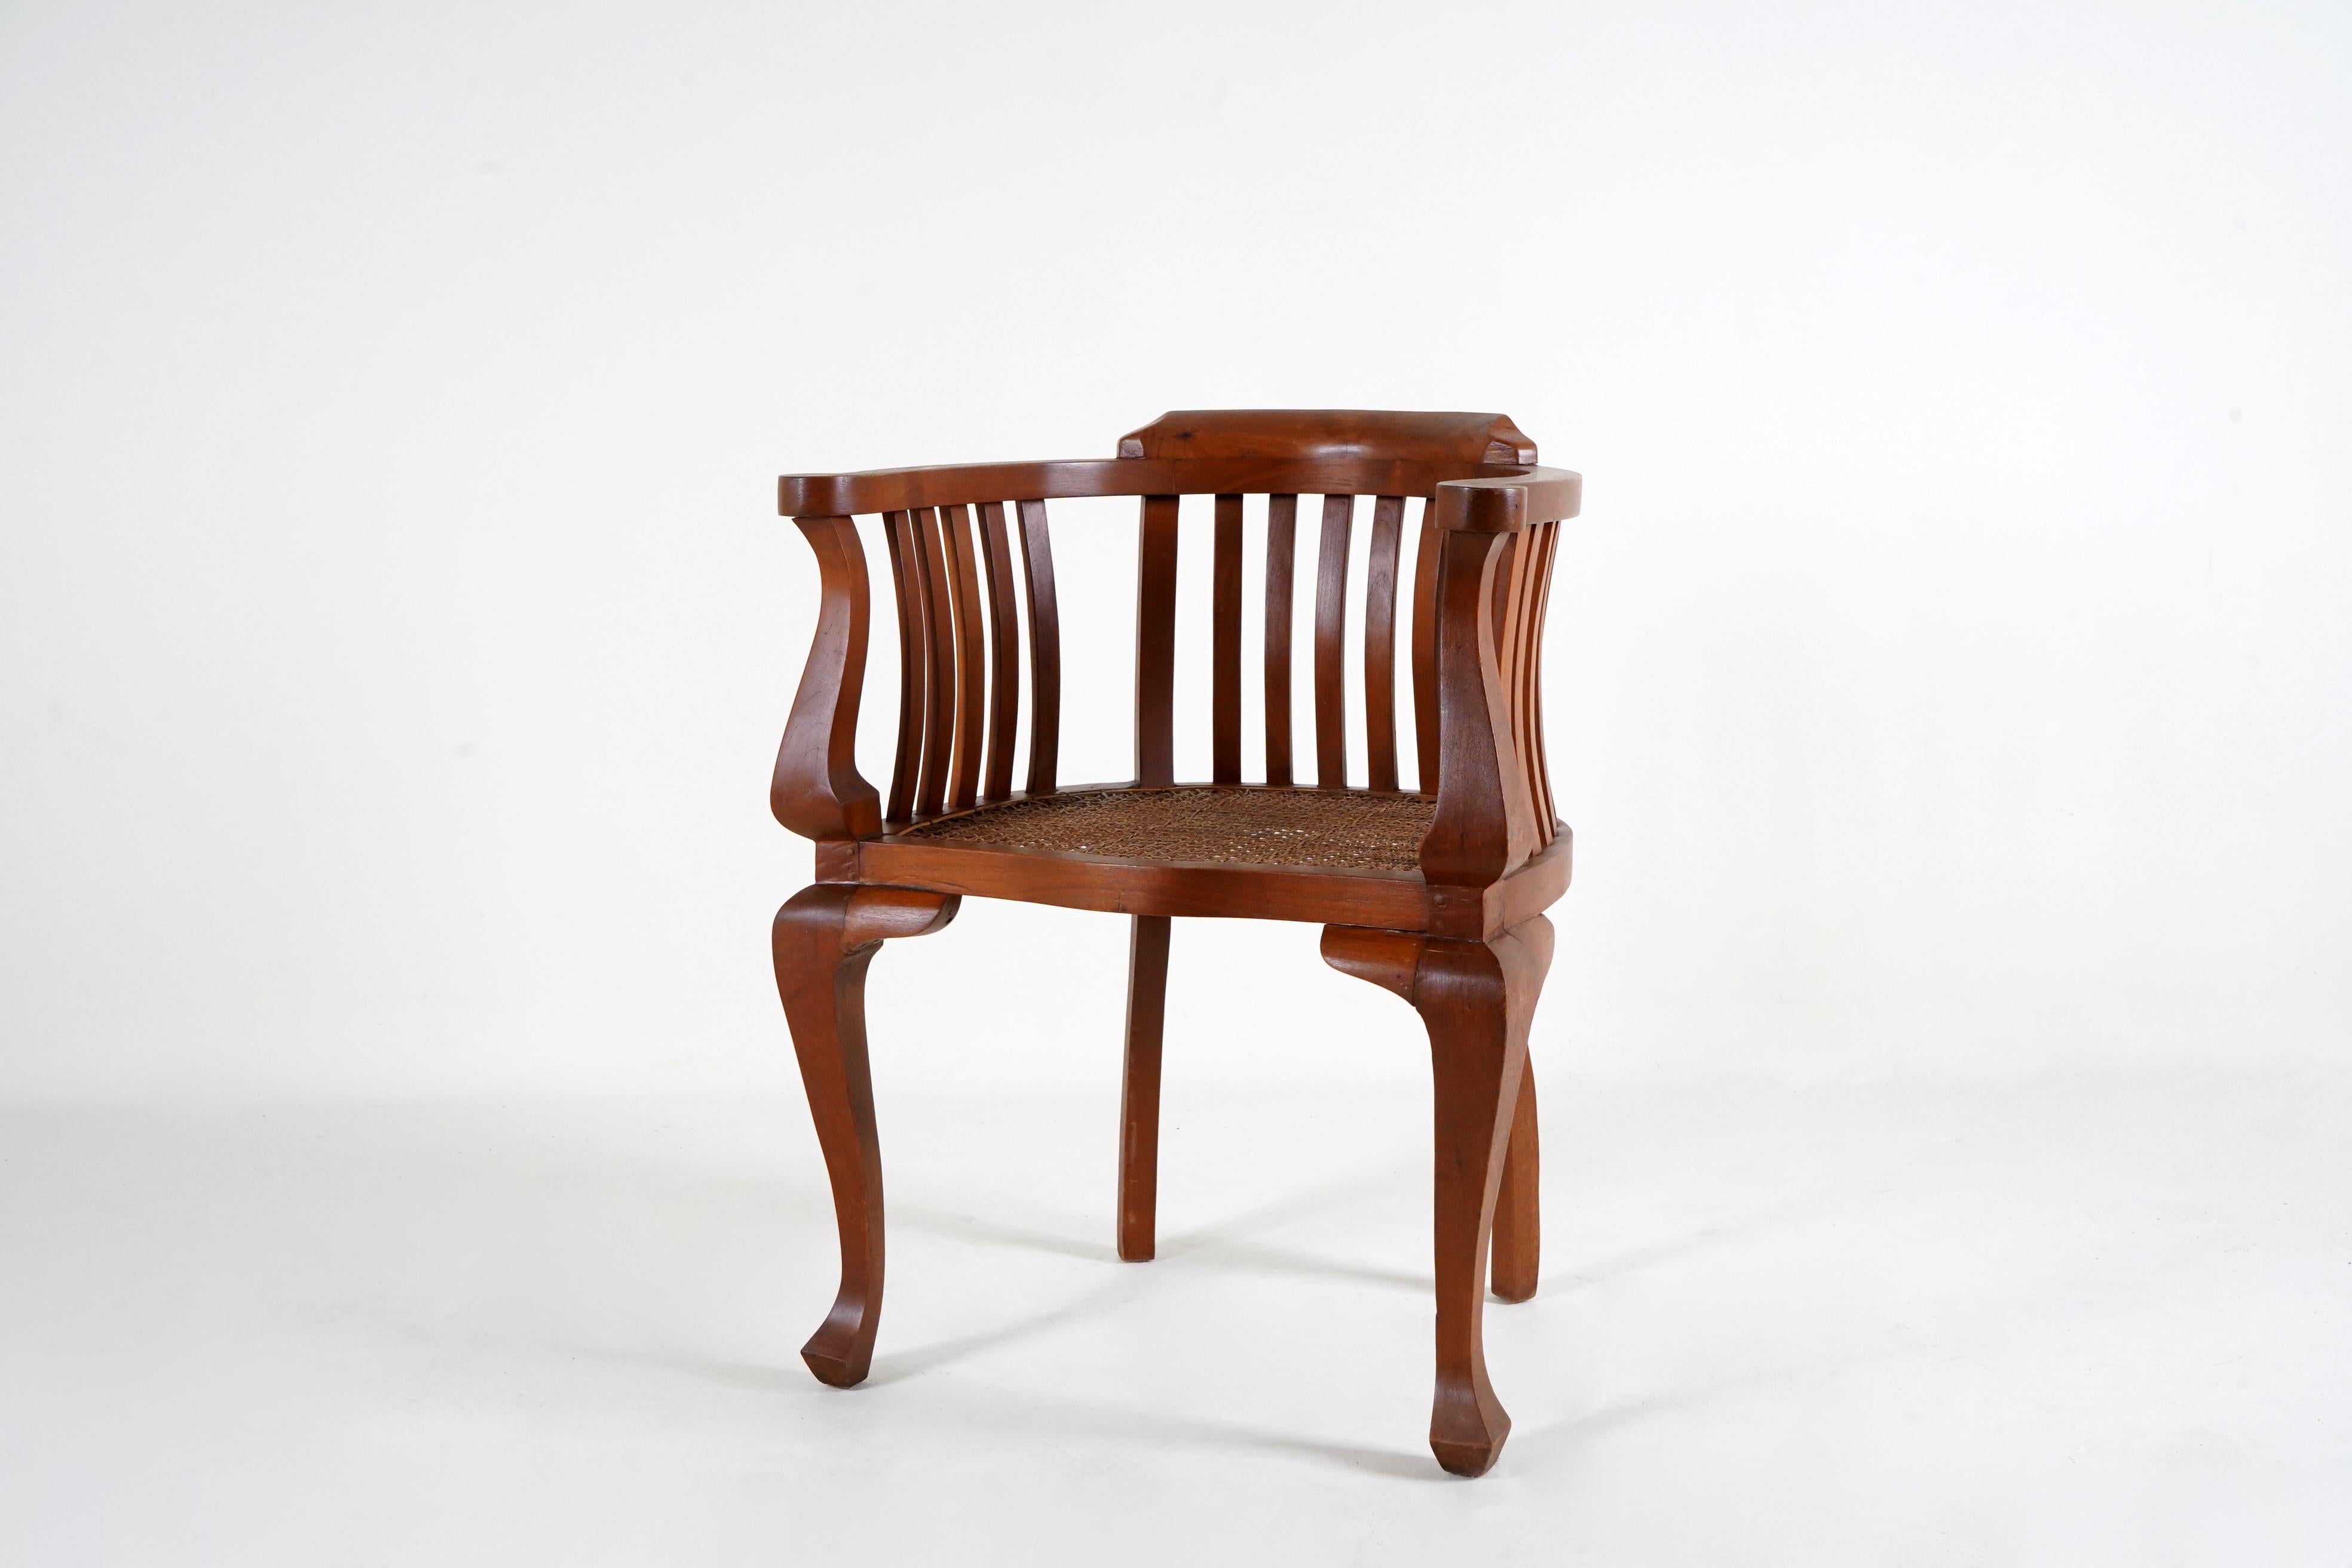 A Pair of British Colonial Teak Arm Chairs With Rattan Seats 1